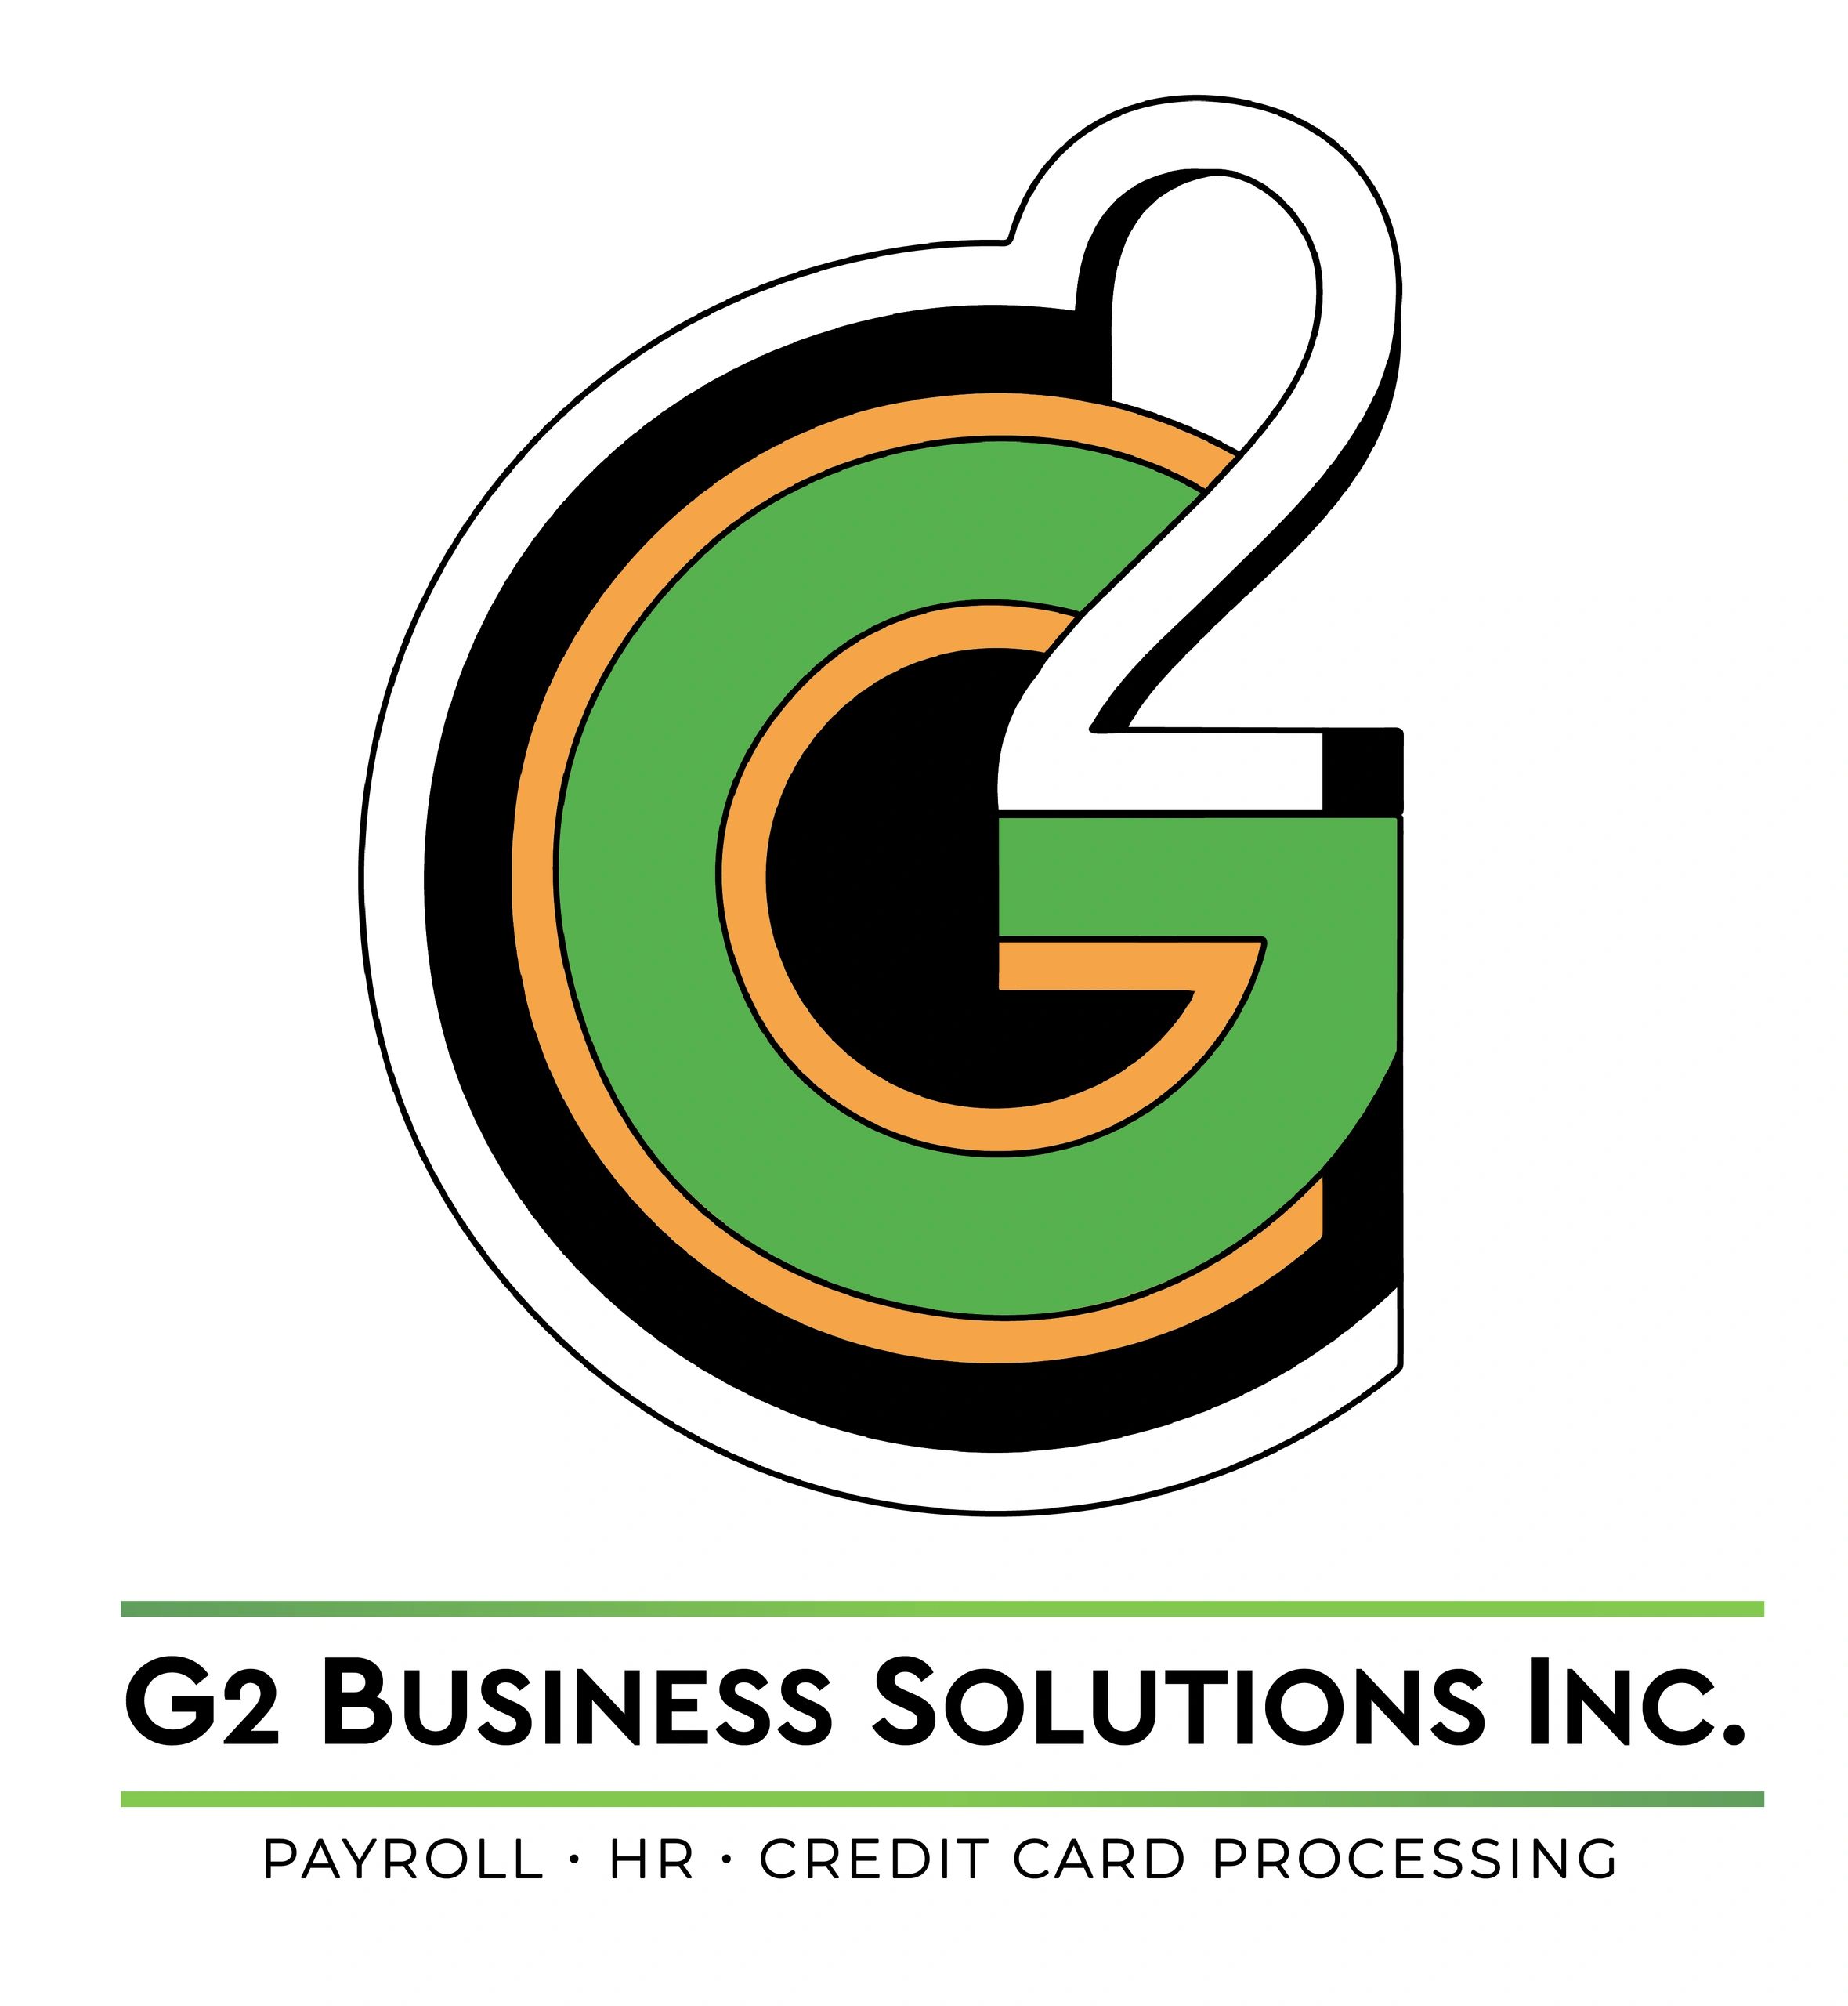 G2 Business Solutions Inc offers a more human side to payroll for small business. 